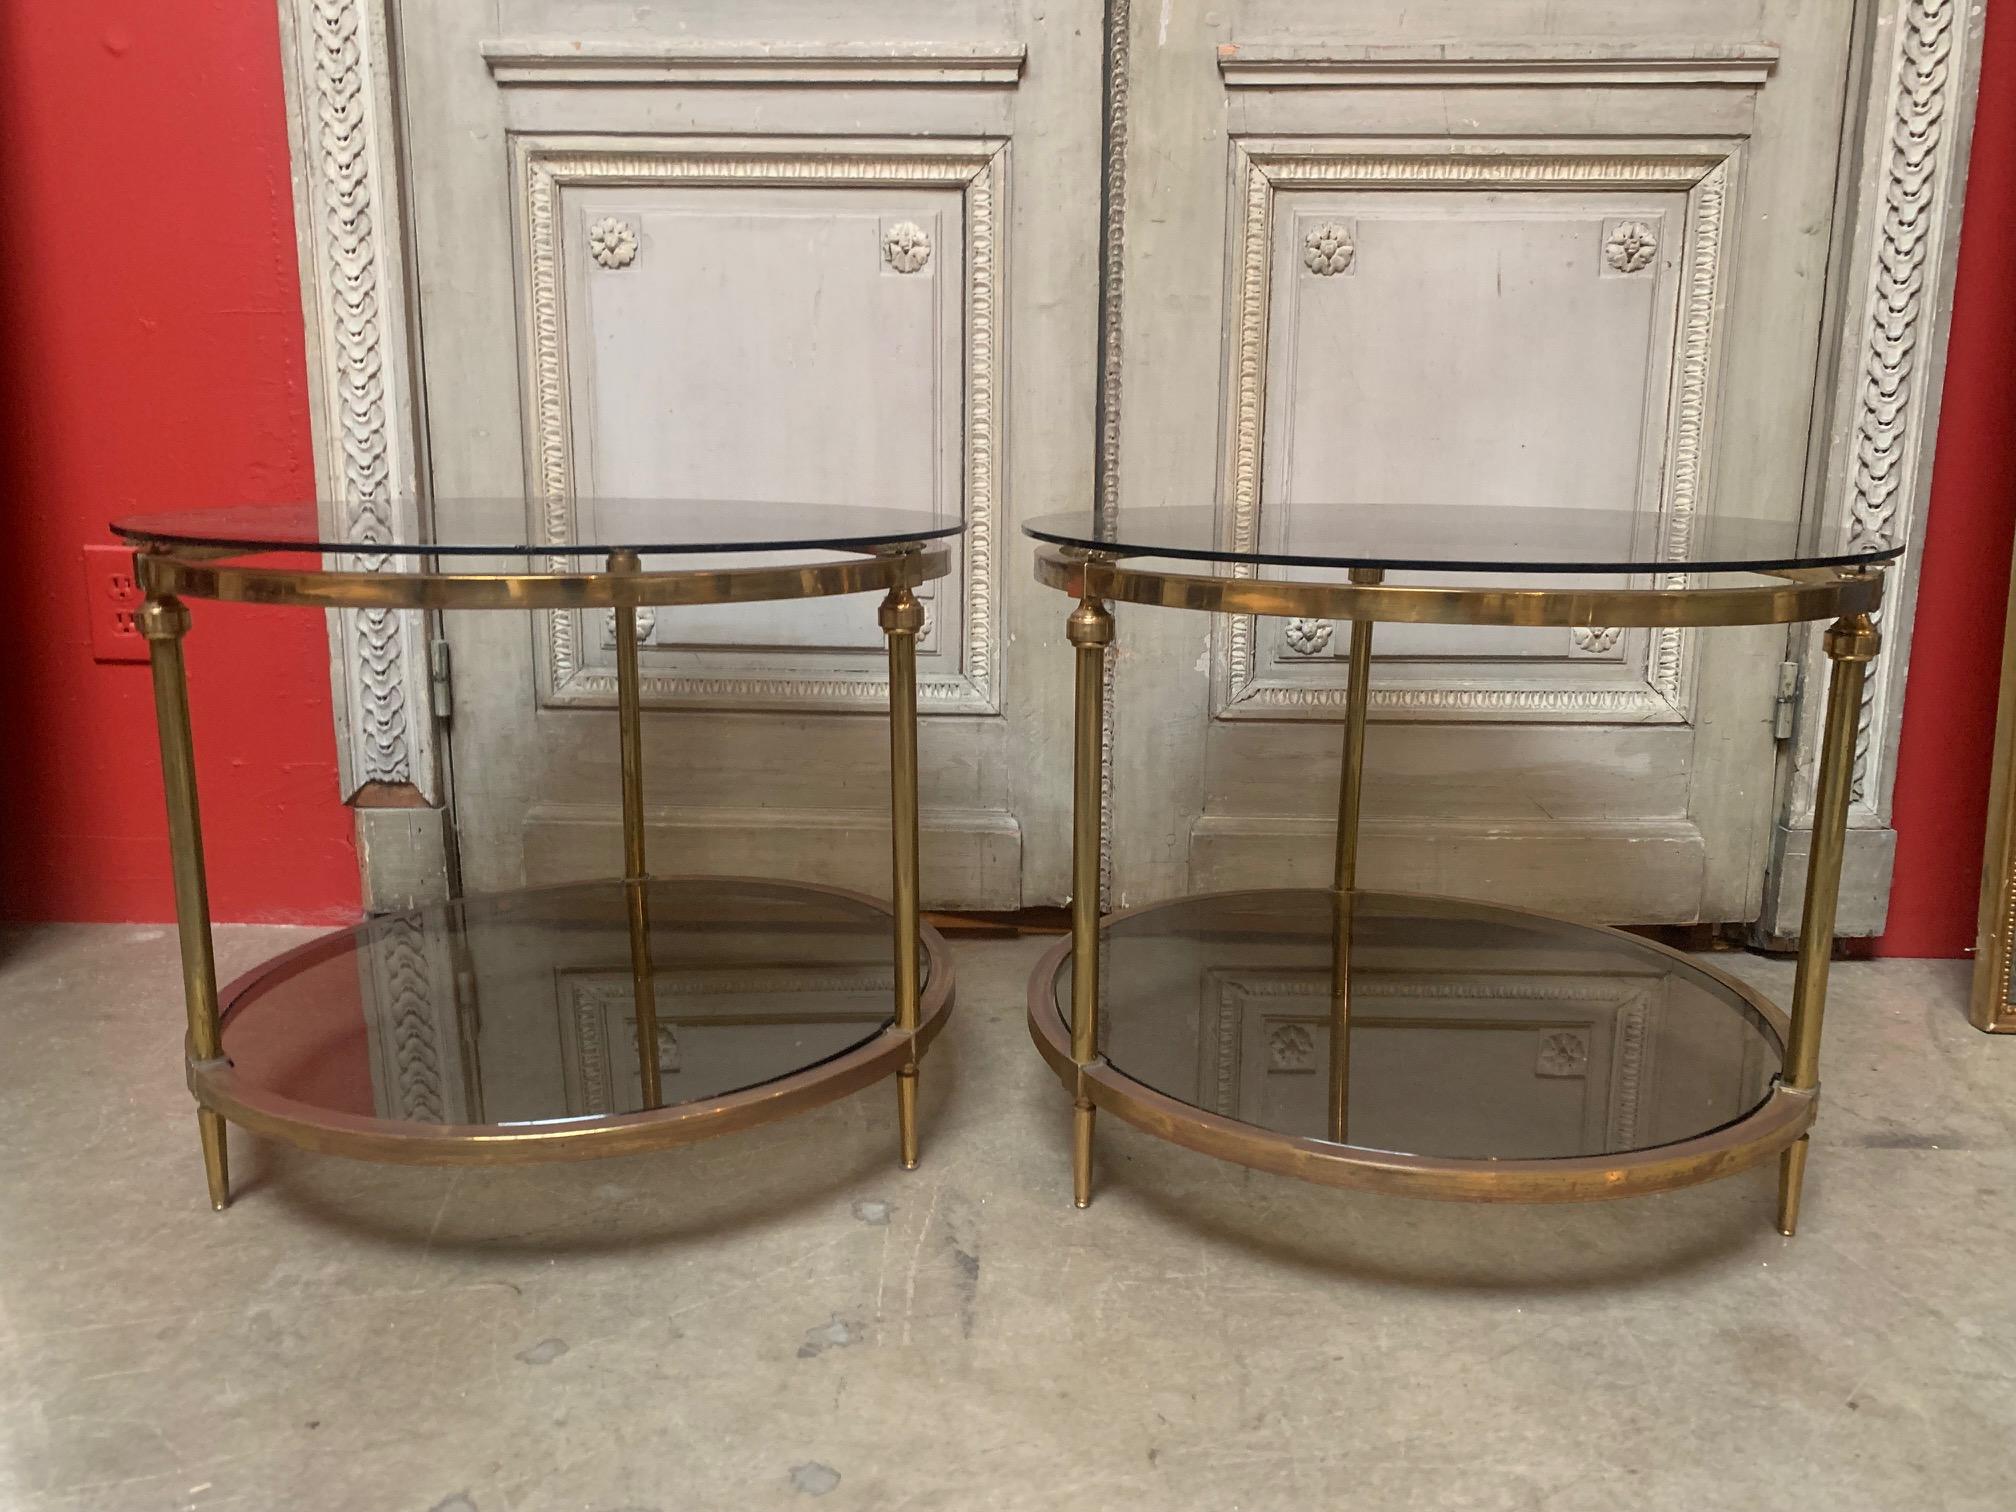 A pair of French 20th century round two tiered brass and smoked glass end tables in a neoclassical style. Great scale and function.